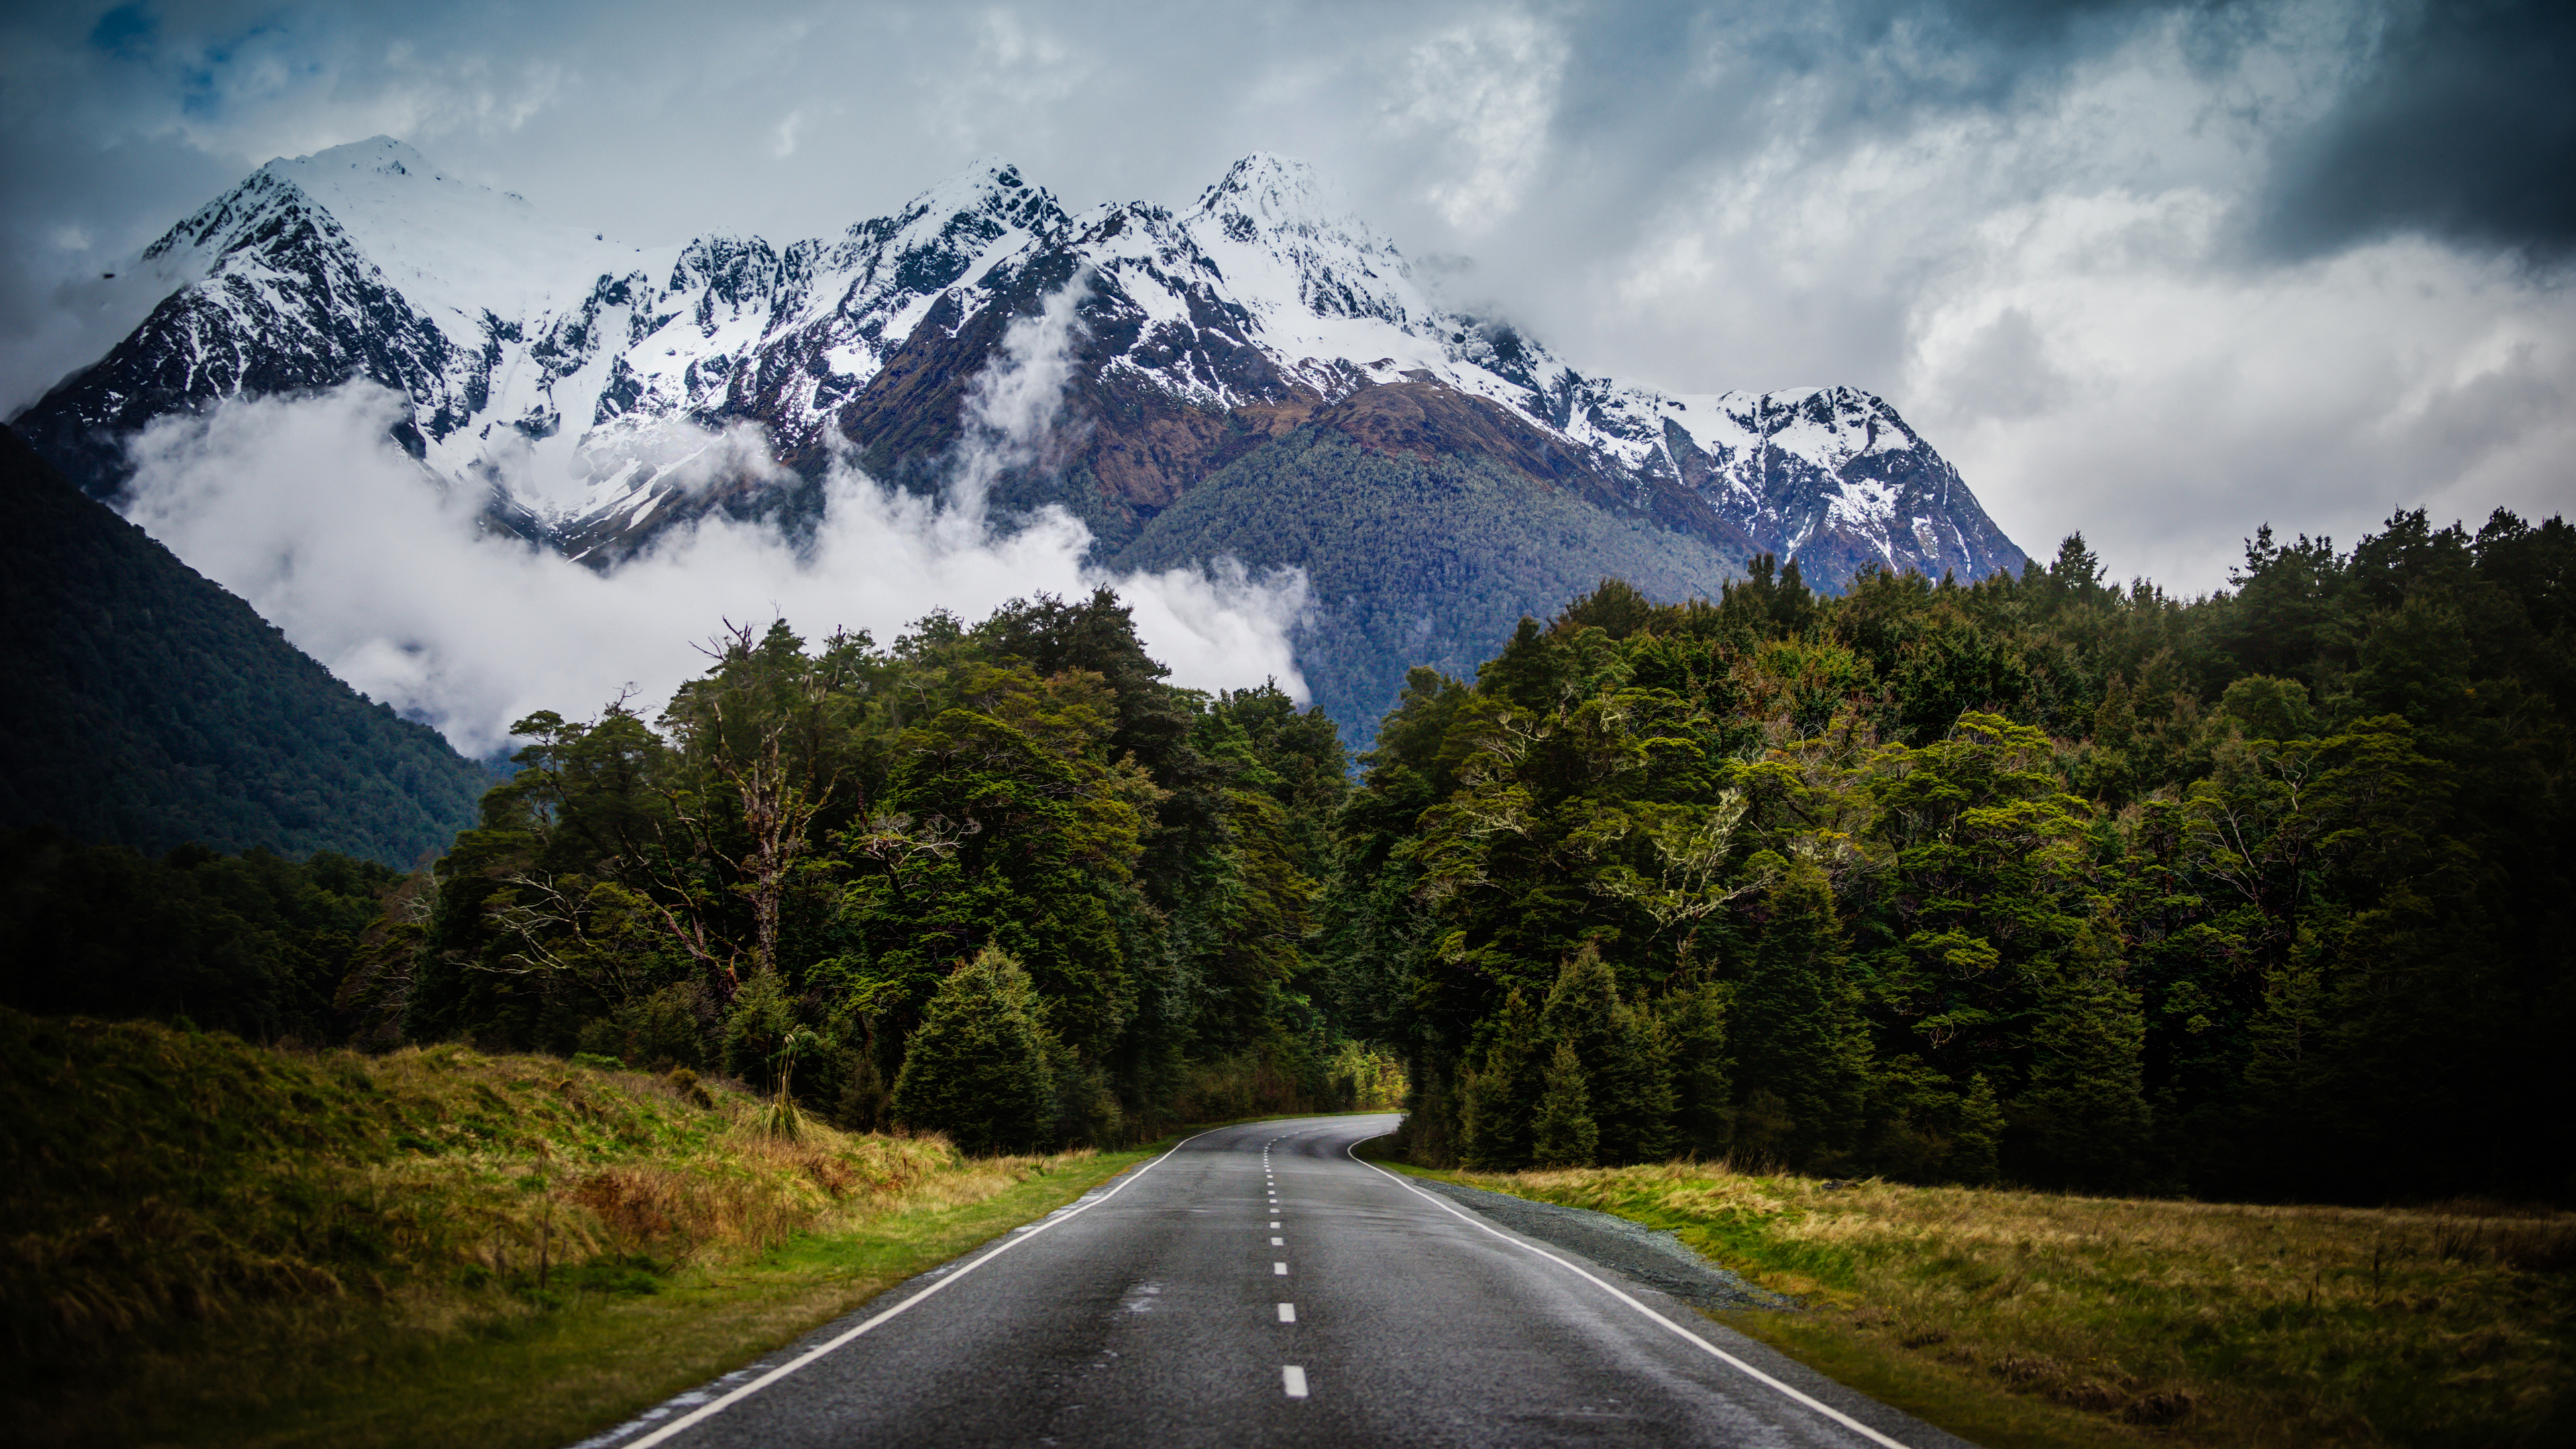 Trey Ratcliff Photography Landscape New Zealand Nature Mountains Road Snow Trees Clouds 3840x2160